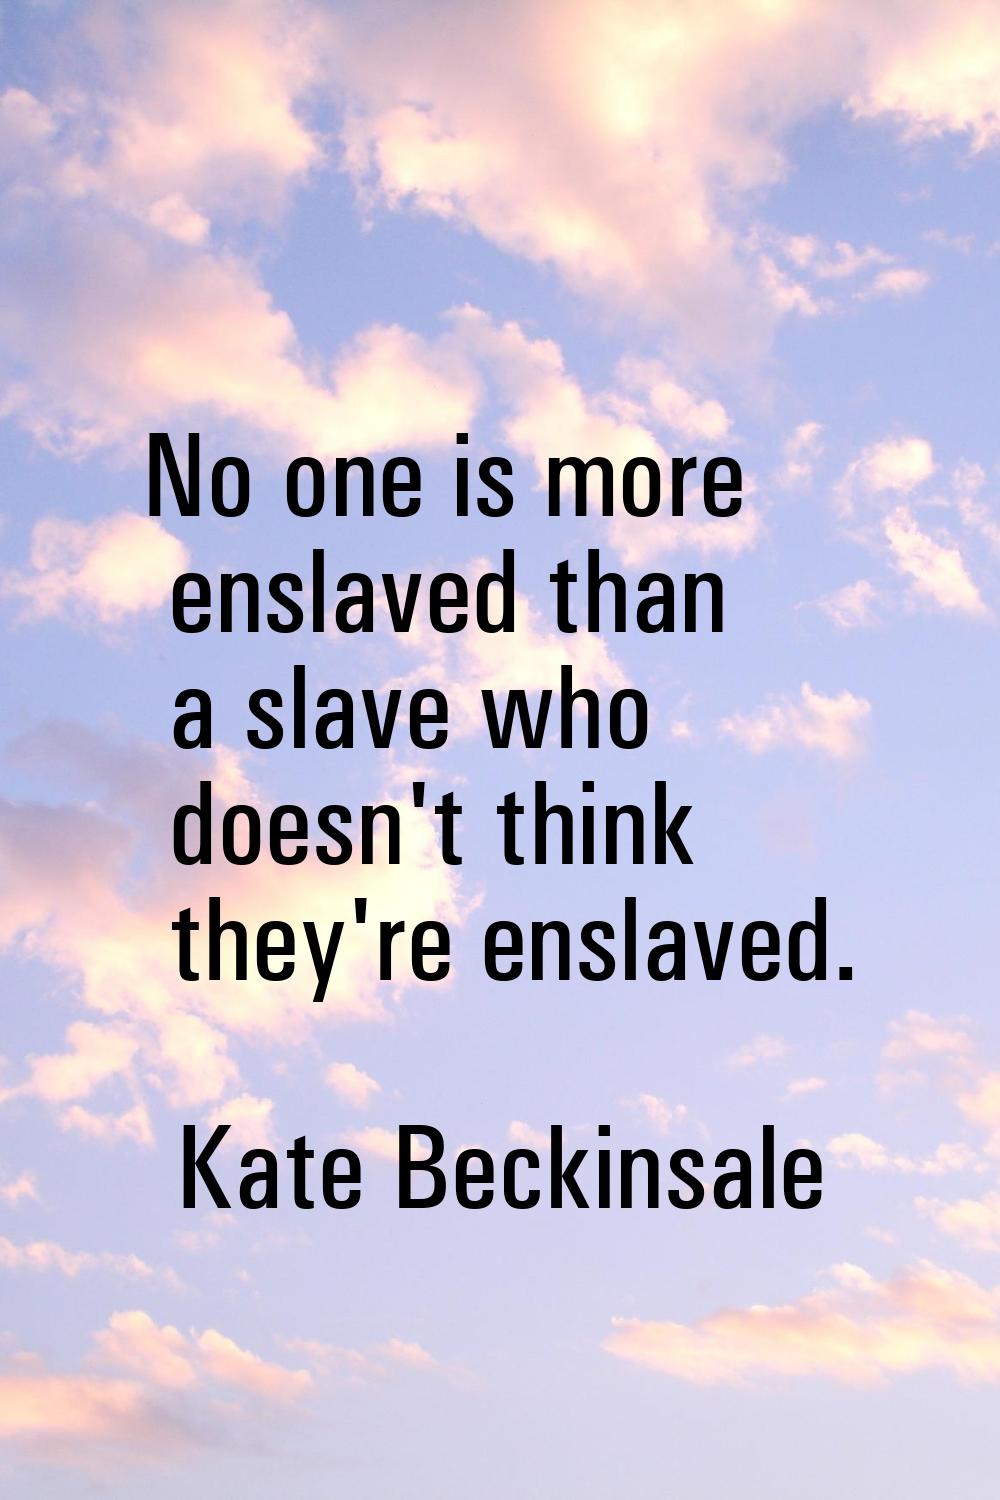 No one is more enslaved than a slave who doesn't think they're enslaved.